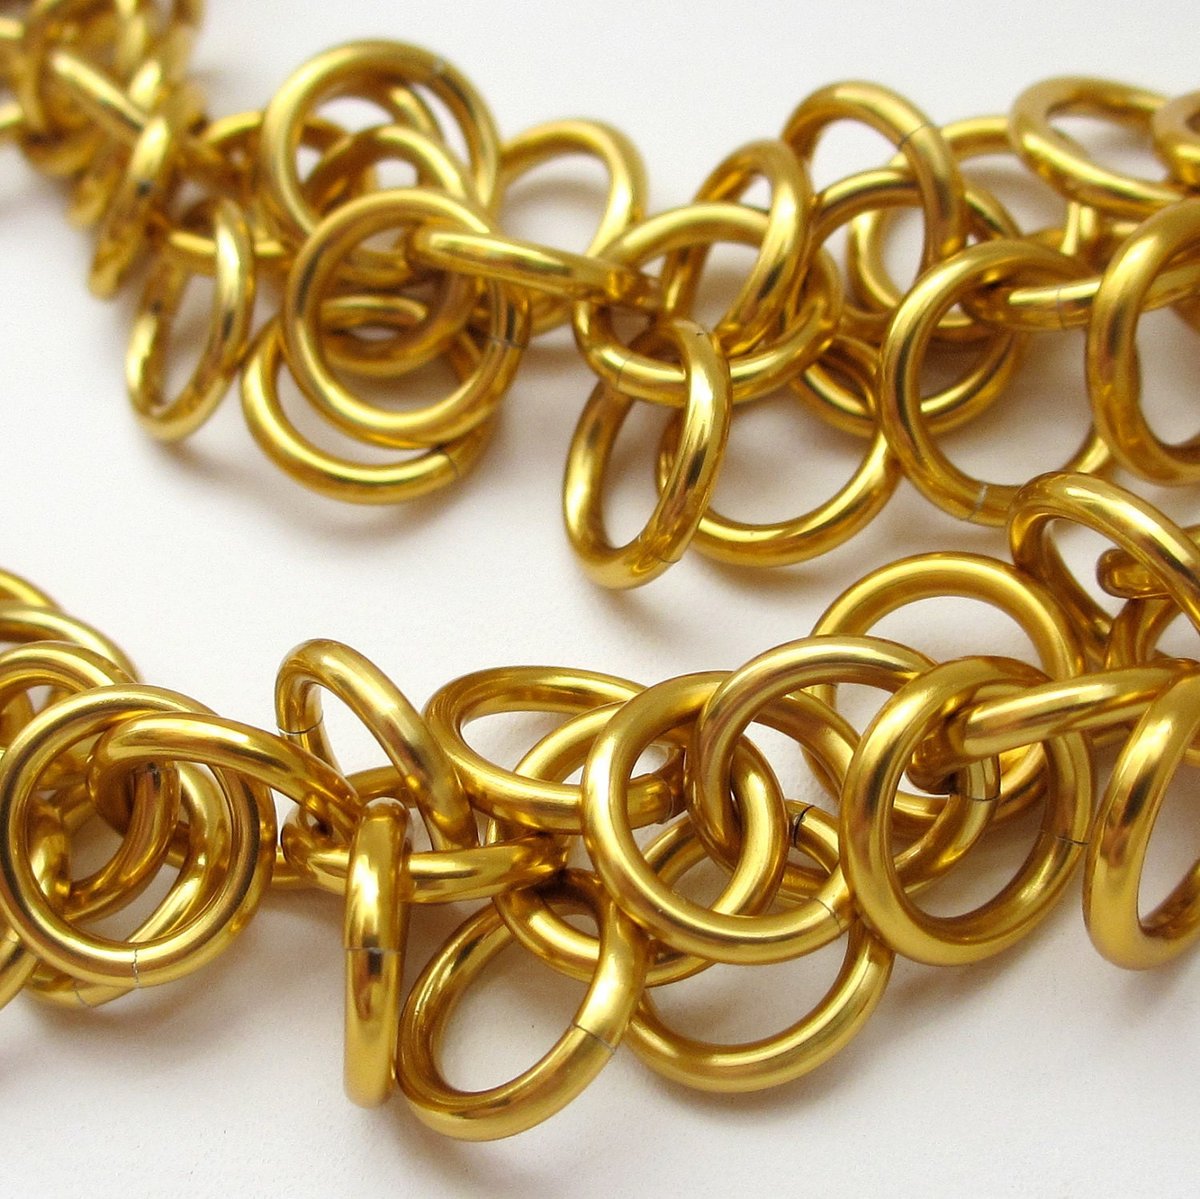 Clearance 40% off, Chainmaille shaggy loops necklace in gold aluminum